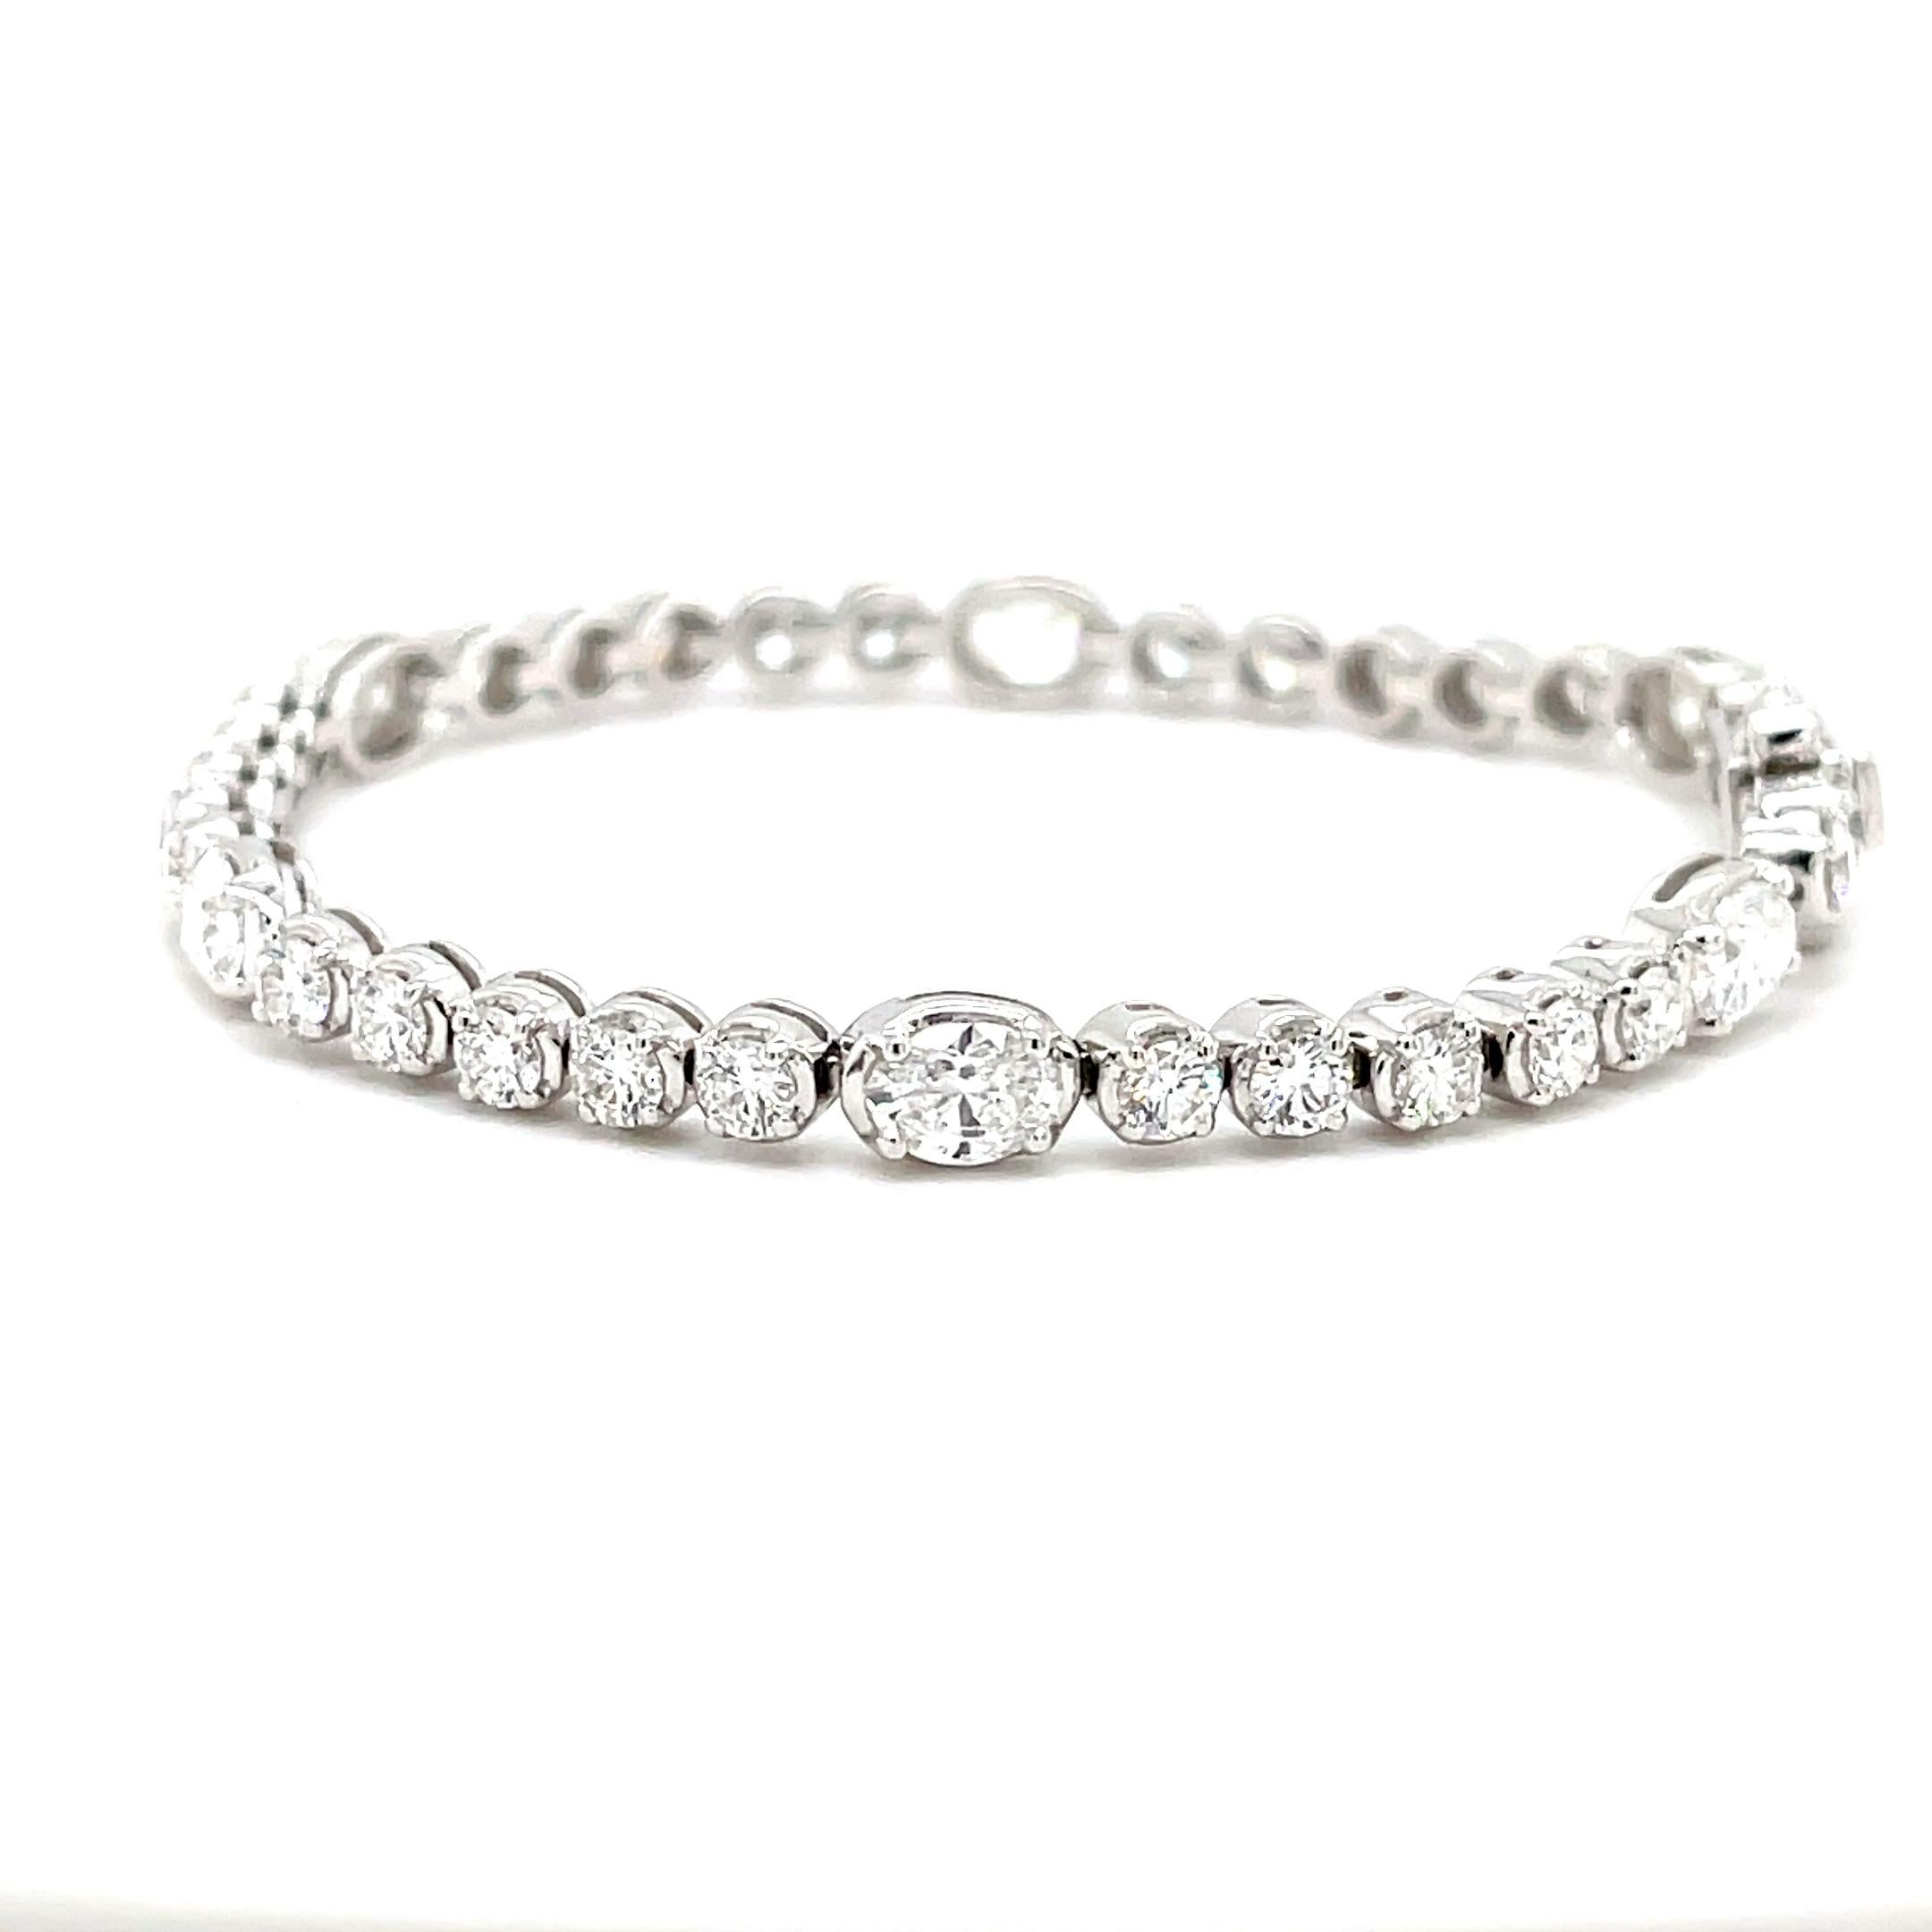 Introducing a touch of elegance with our 5.89-carat Oval & Round Natural Diamond Bracelet in 18K White Gold. The charm lies in its simplicity - six delicate oval diamonds, totaling 2.74 carats, complemented by a cluster of thirty round diamonds,